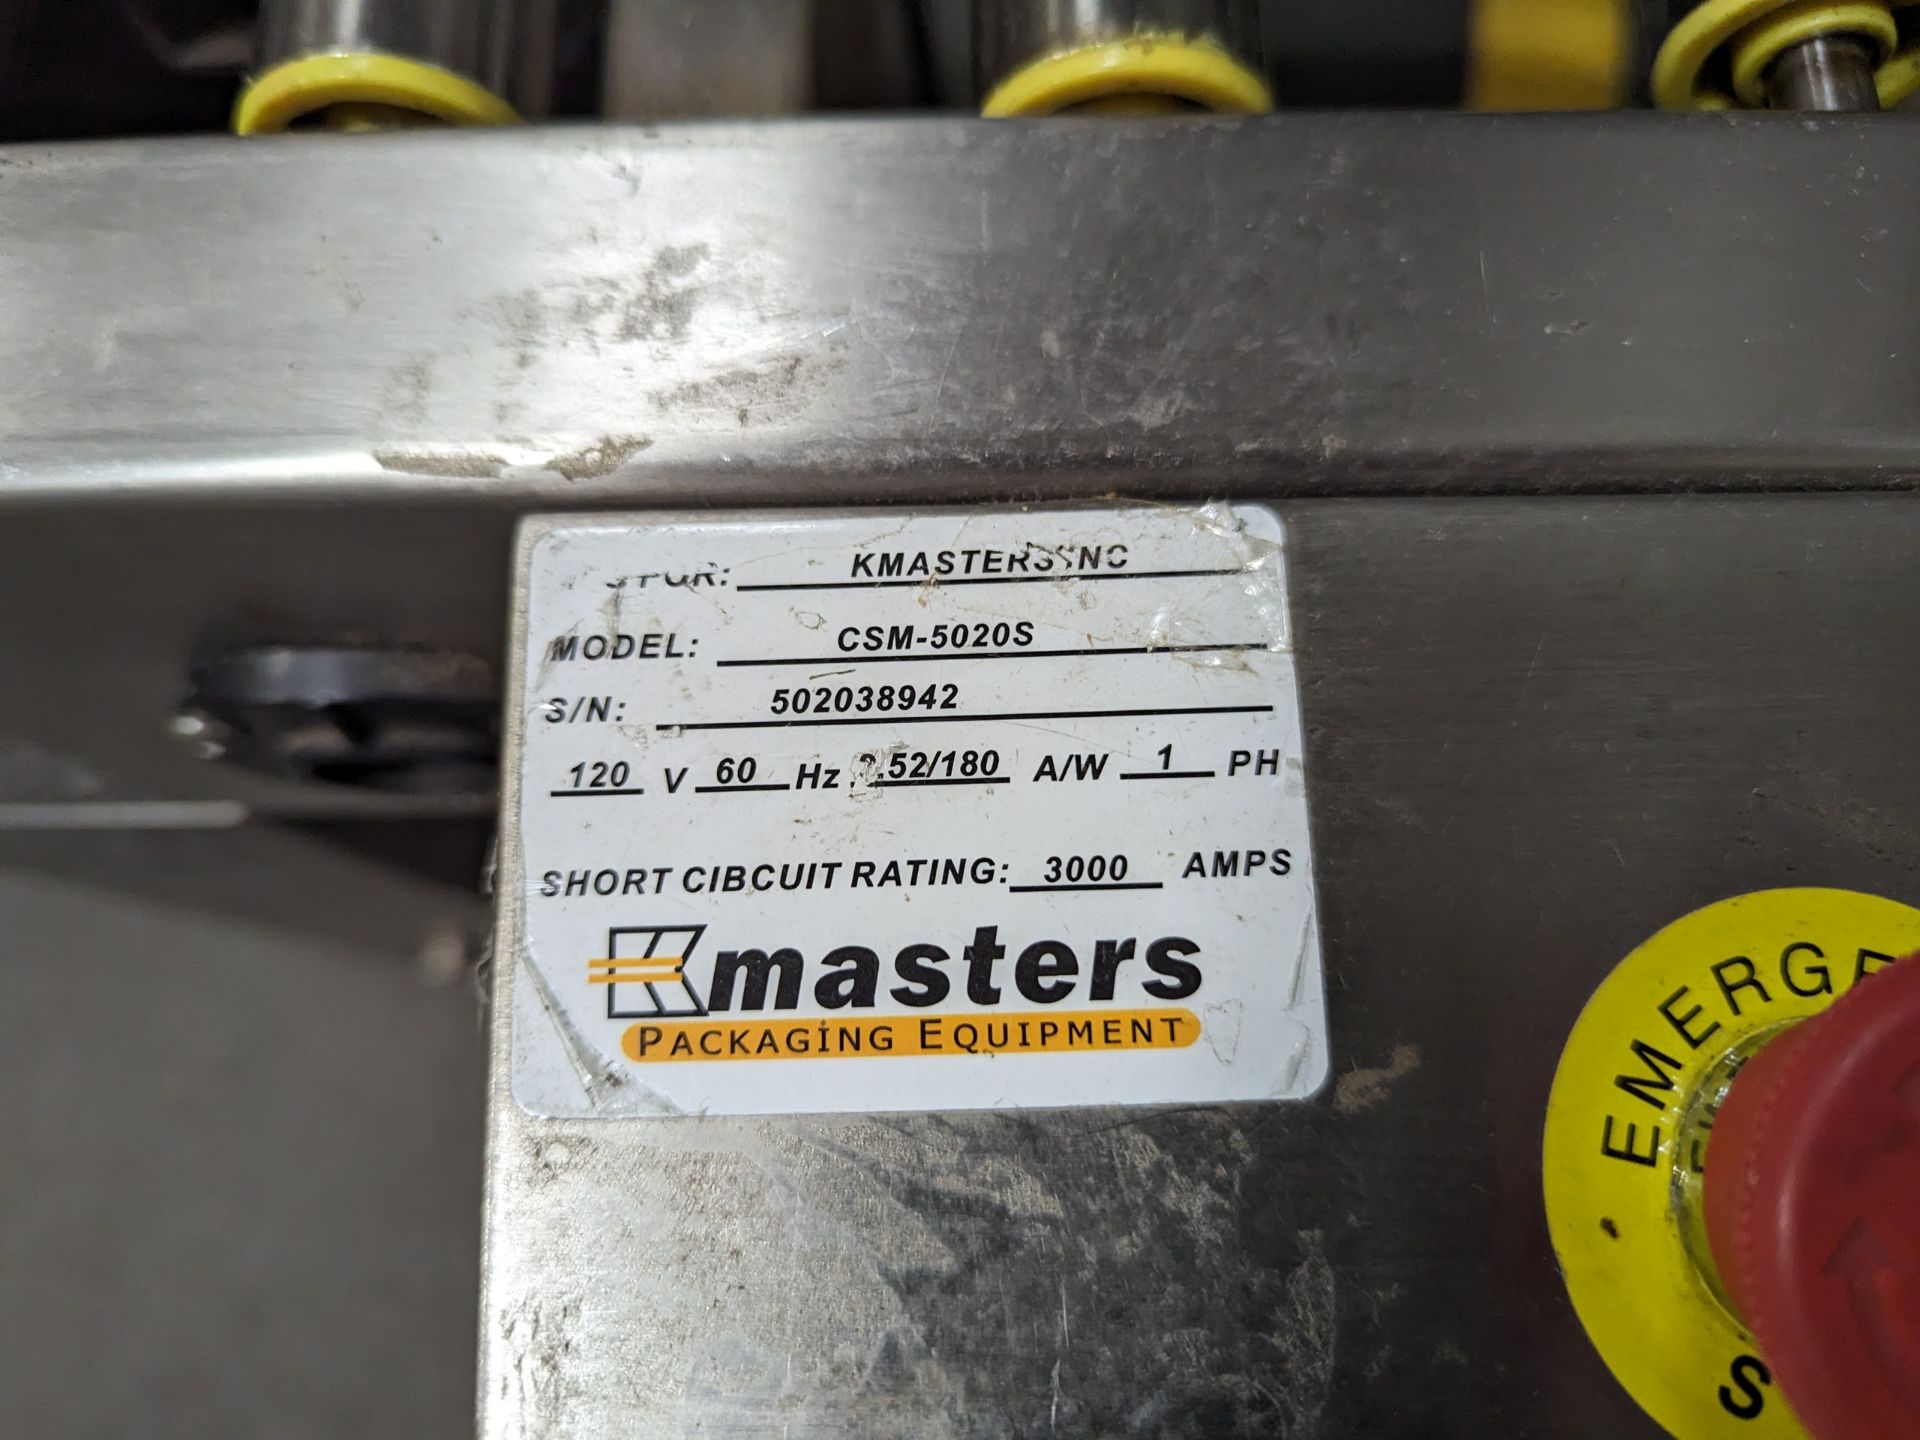 Kmasters CSM-5020S Case Sealer, Dimensions LxWxH: 71x37x51 - Image 4 of 4